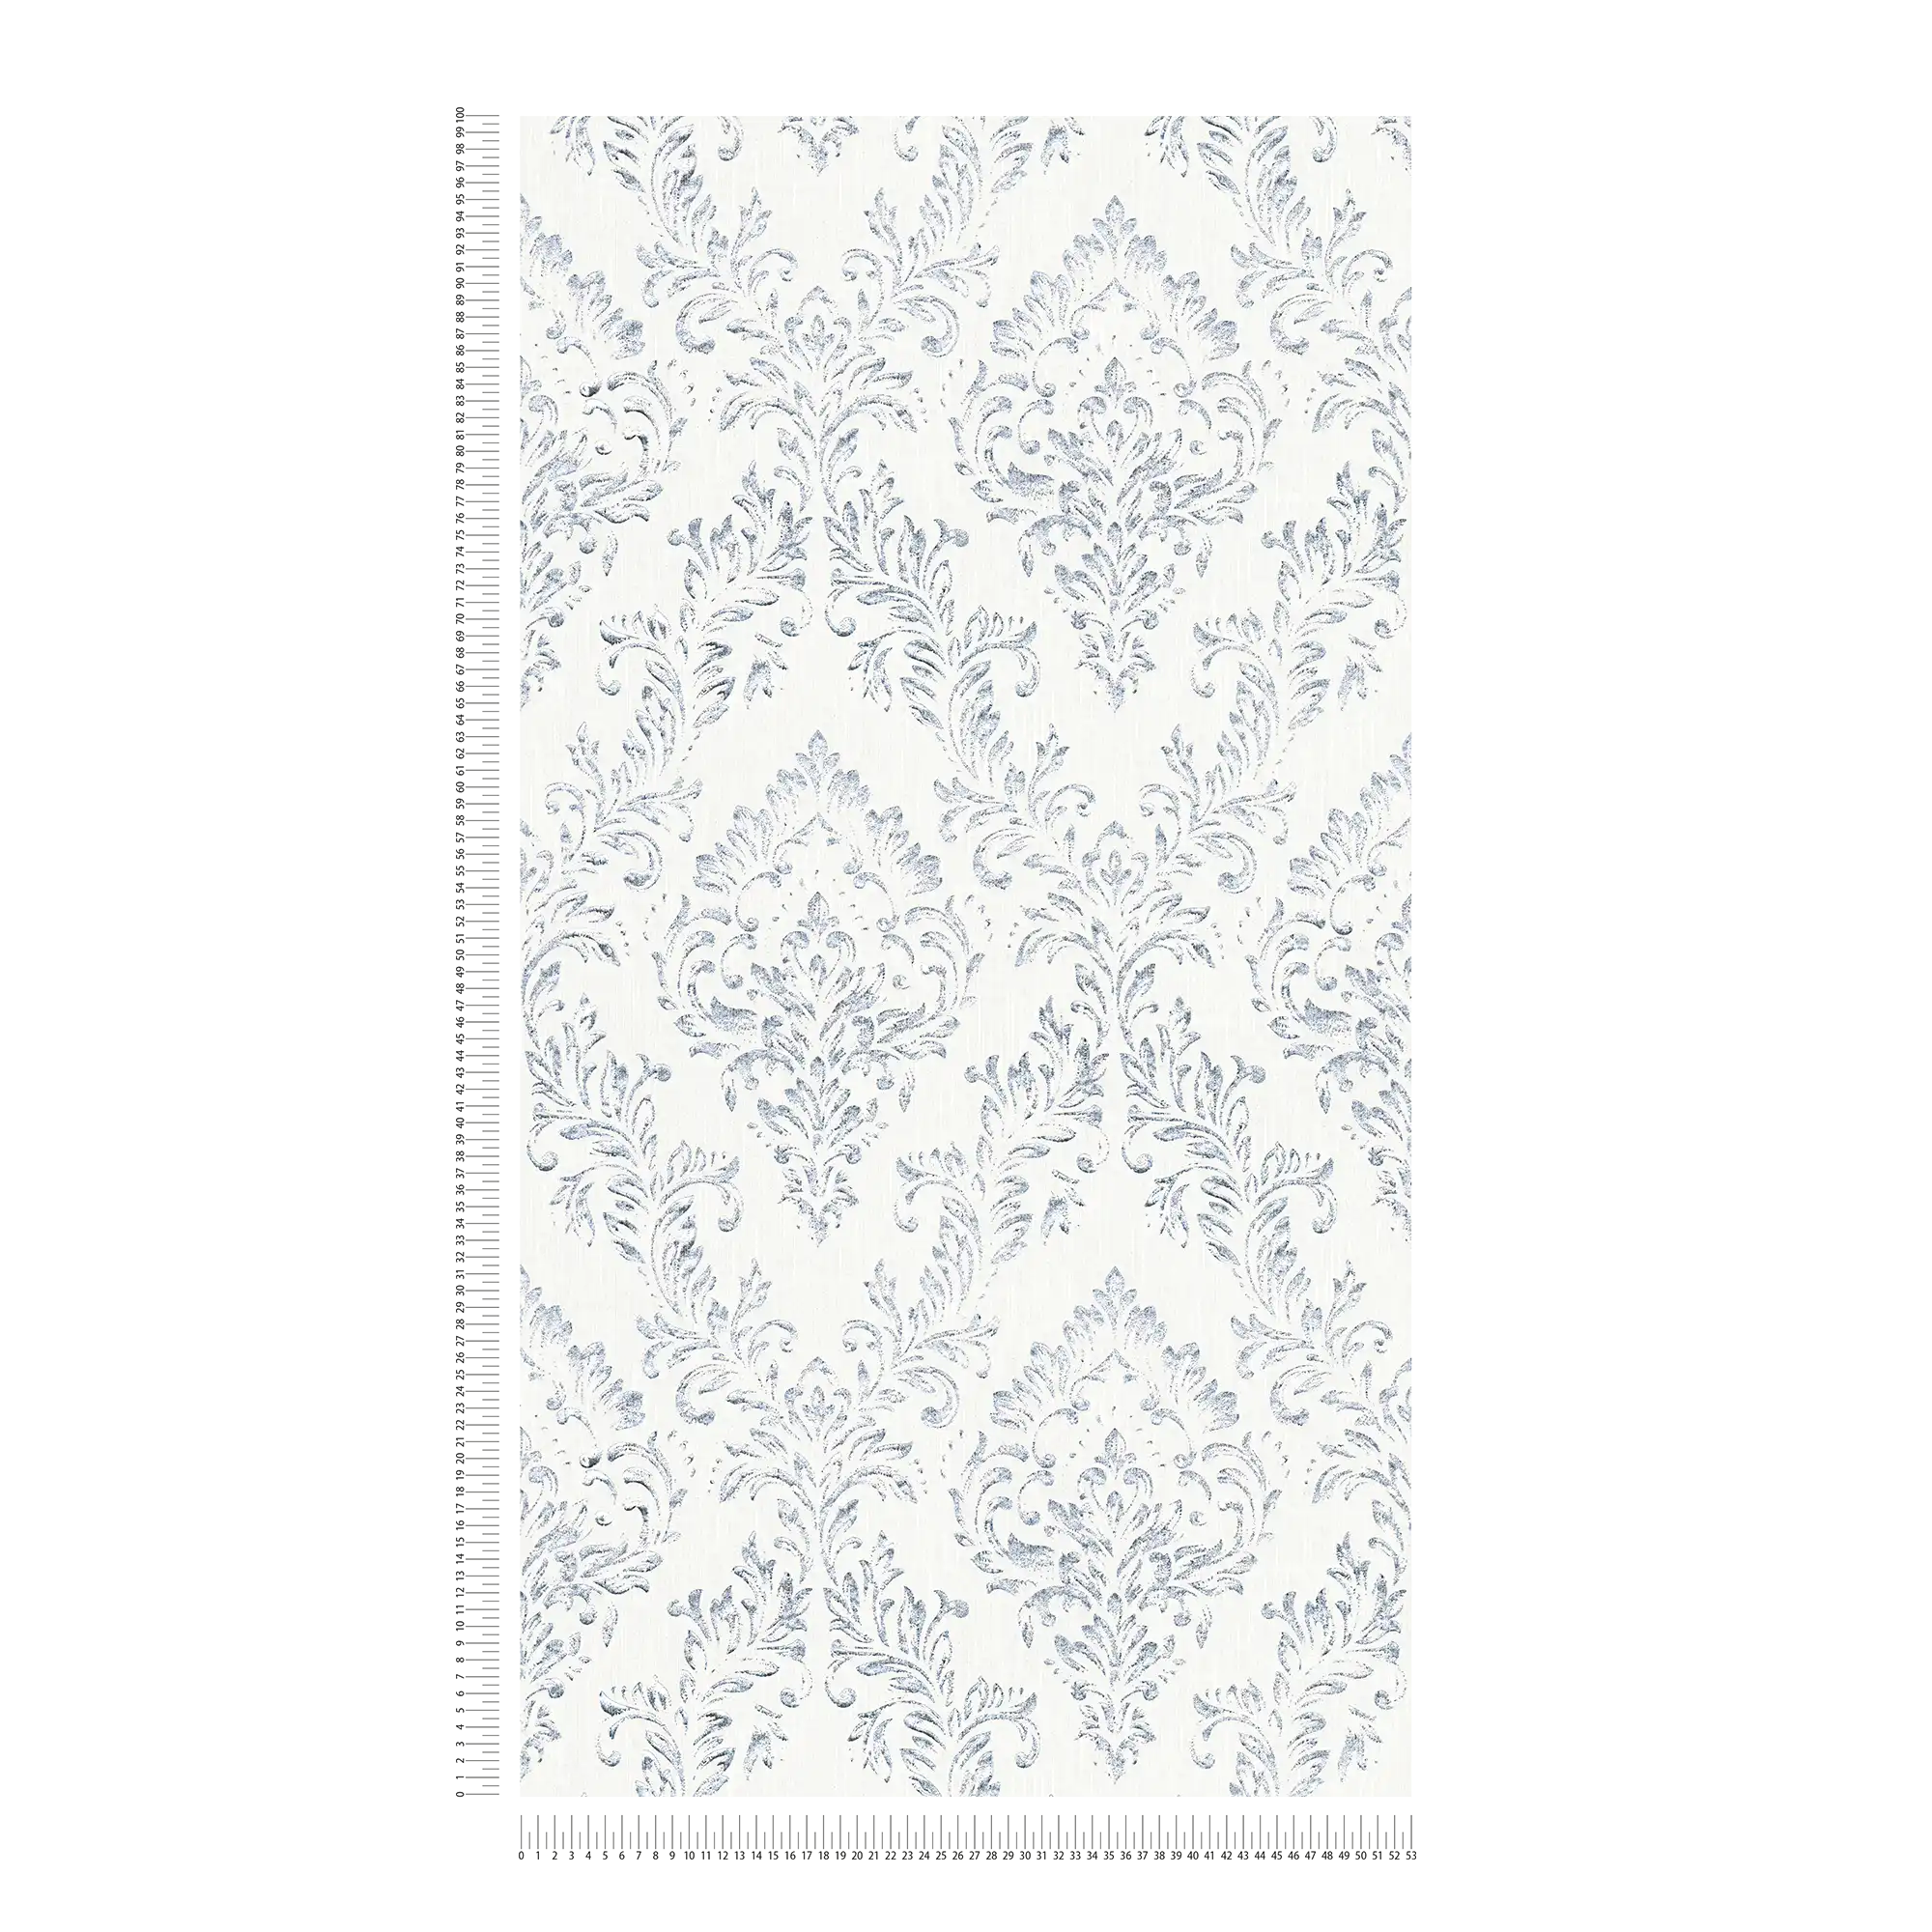             Ornament wallpaper in floral design with glitter effect - silver, white
        